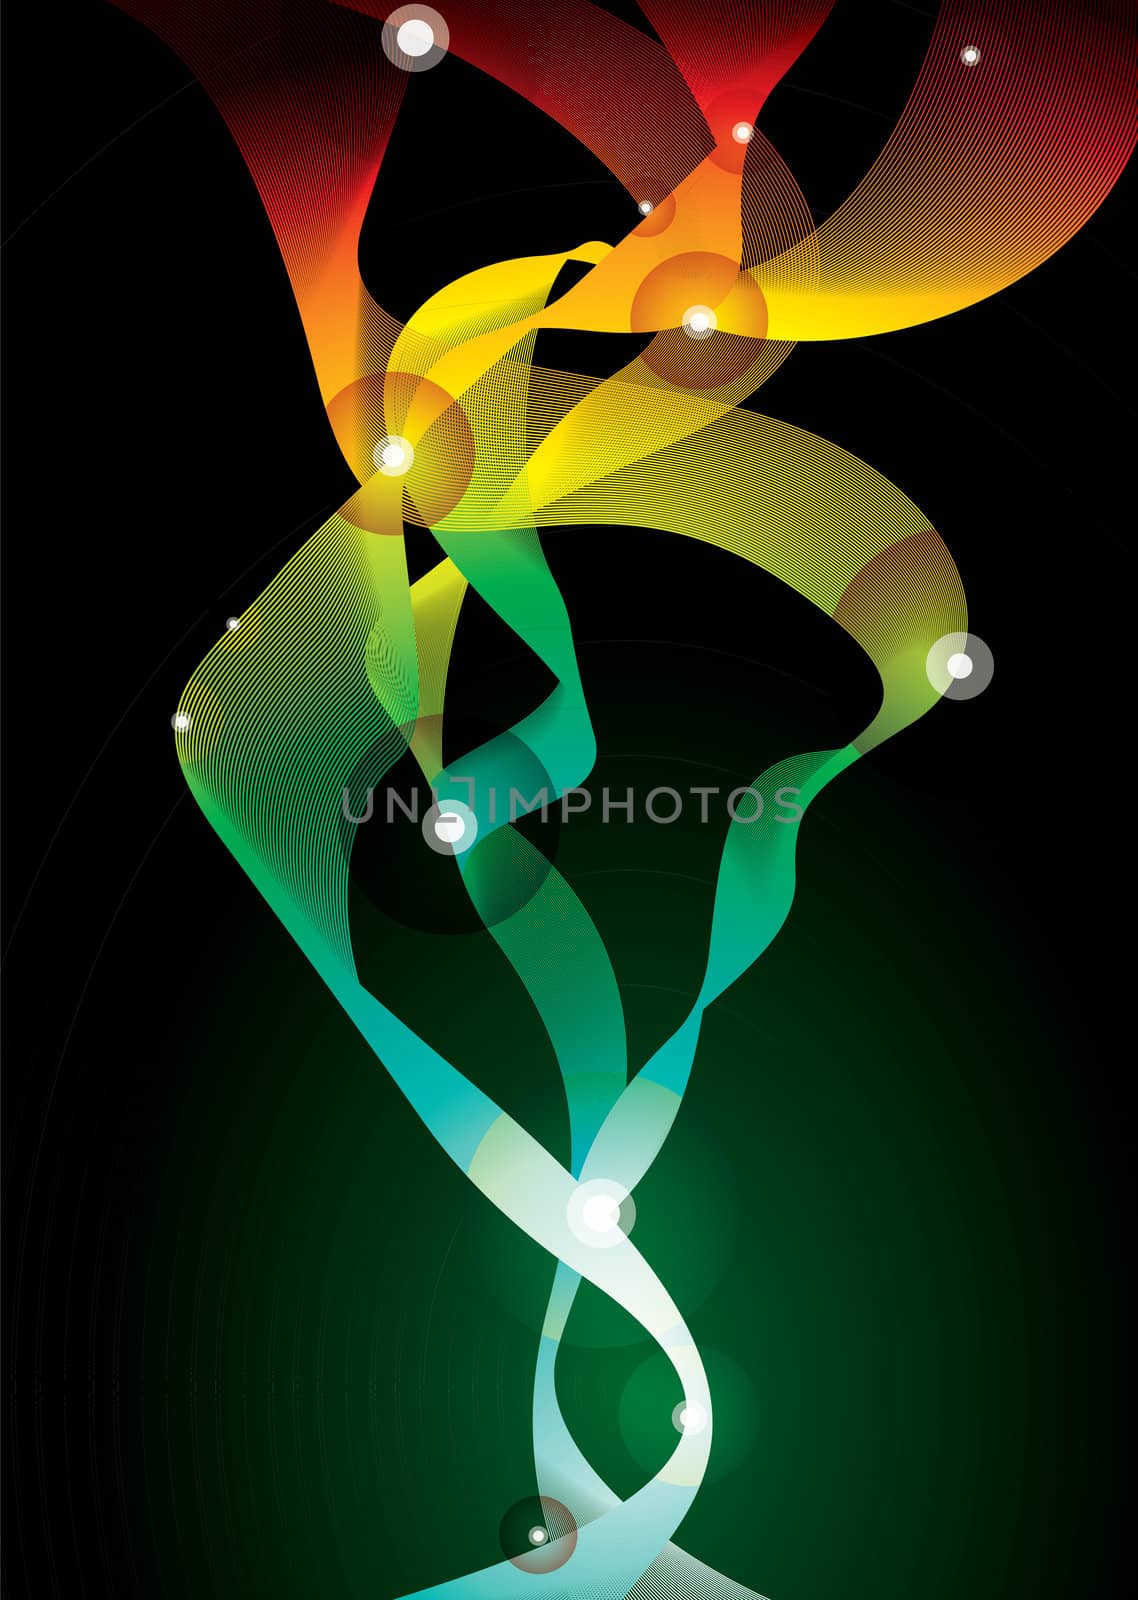 green and orange abstract space background with flowing lines